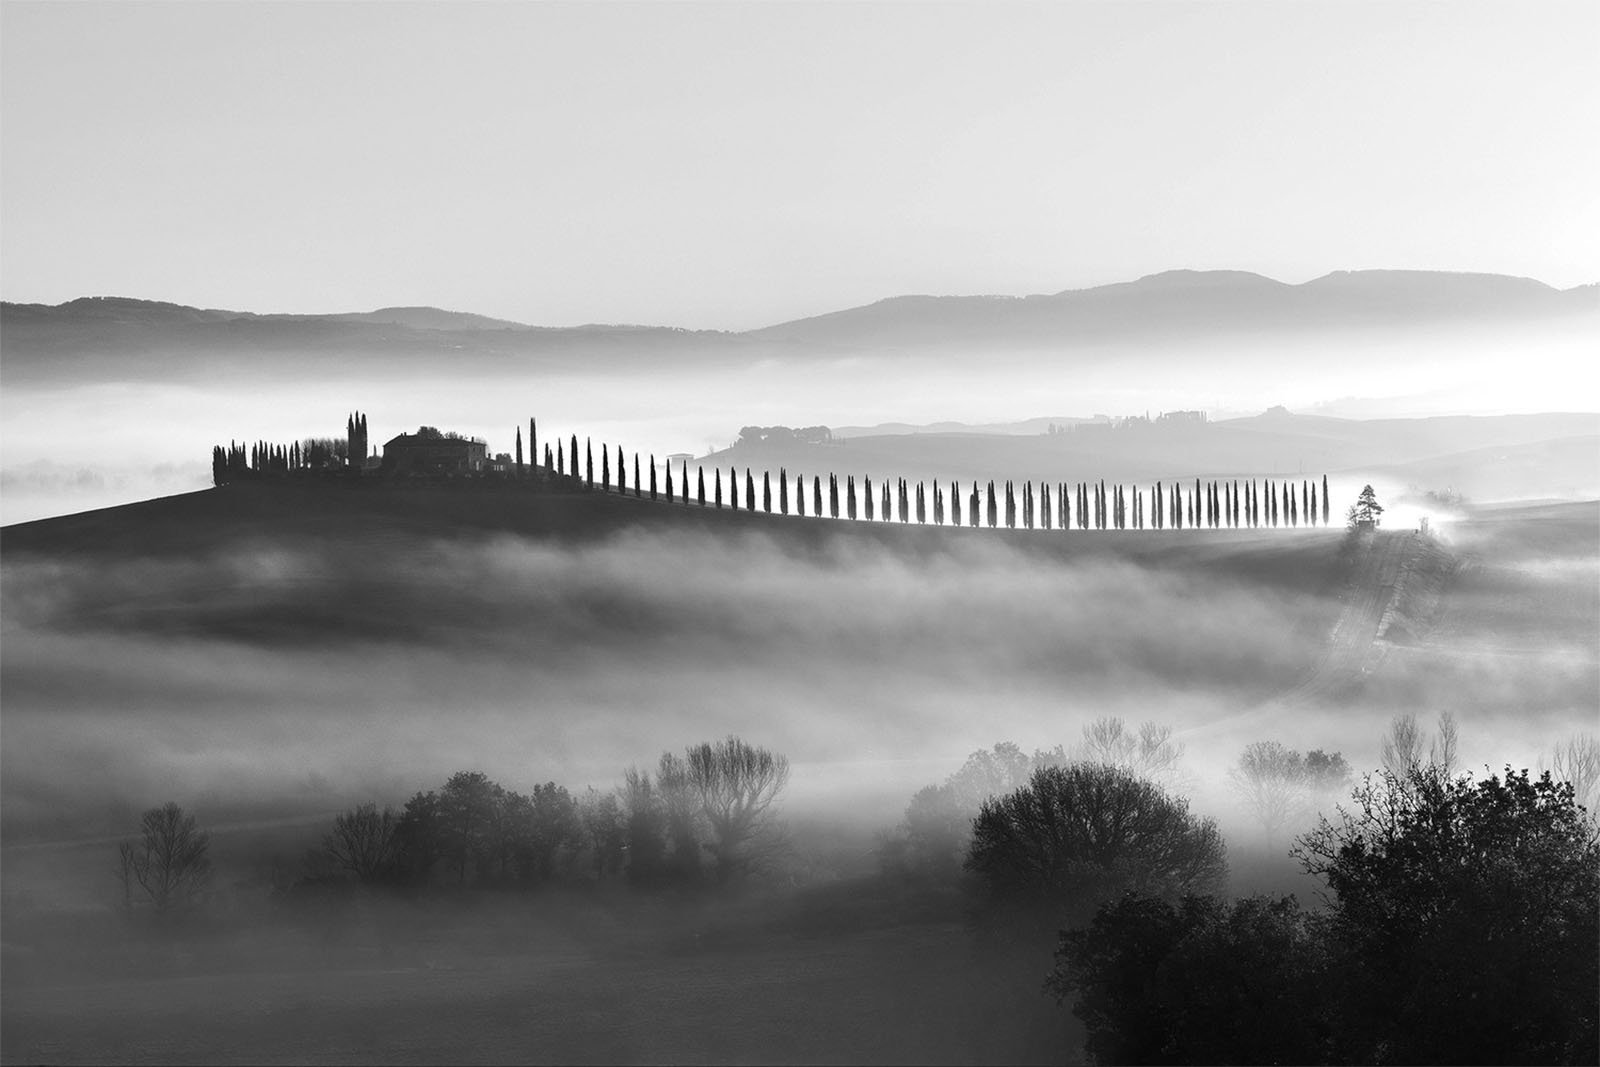 A serene black-and-white landscape shows distant rolling hills enveloped in mist. A line of tall, slender trees traces the ridgeline, leading to a cluster of buildings. The foreground features scattered trees partially obscured by the fog.